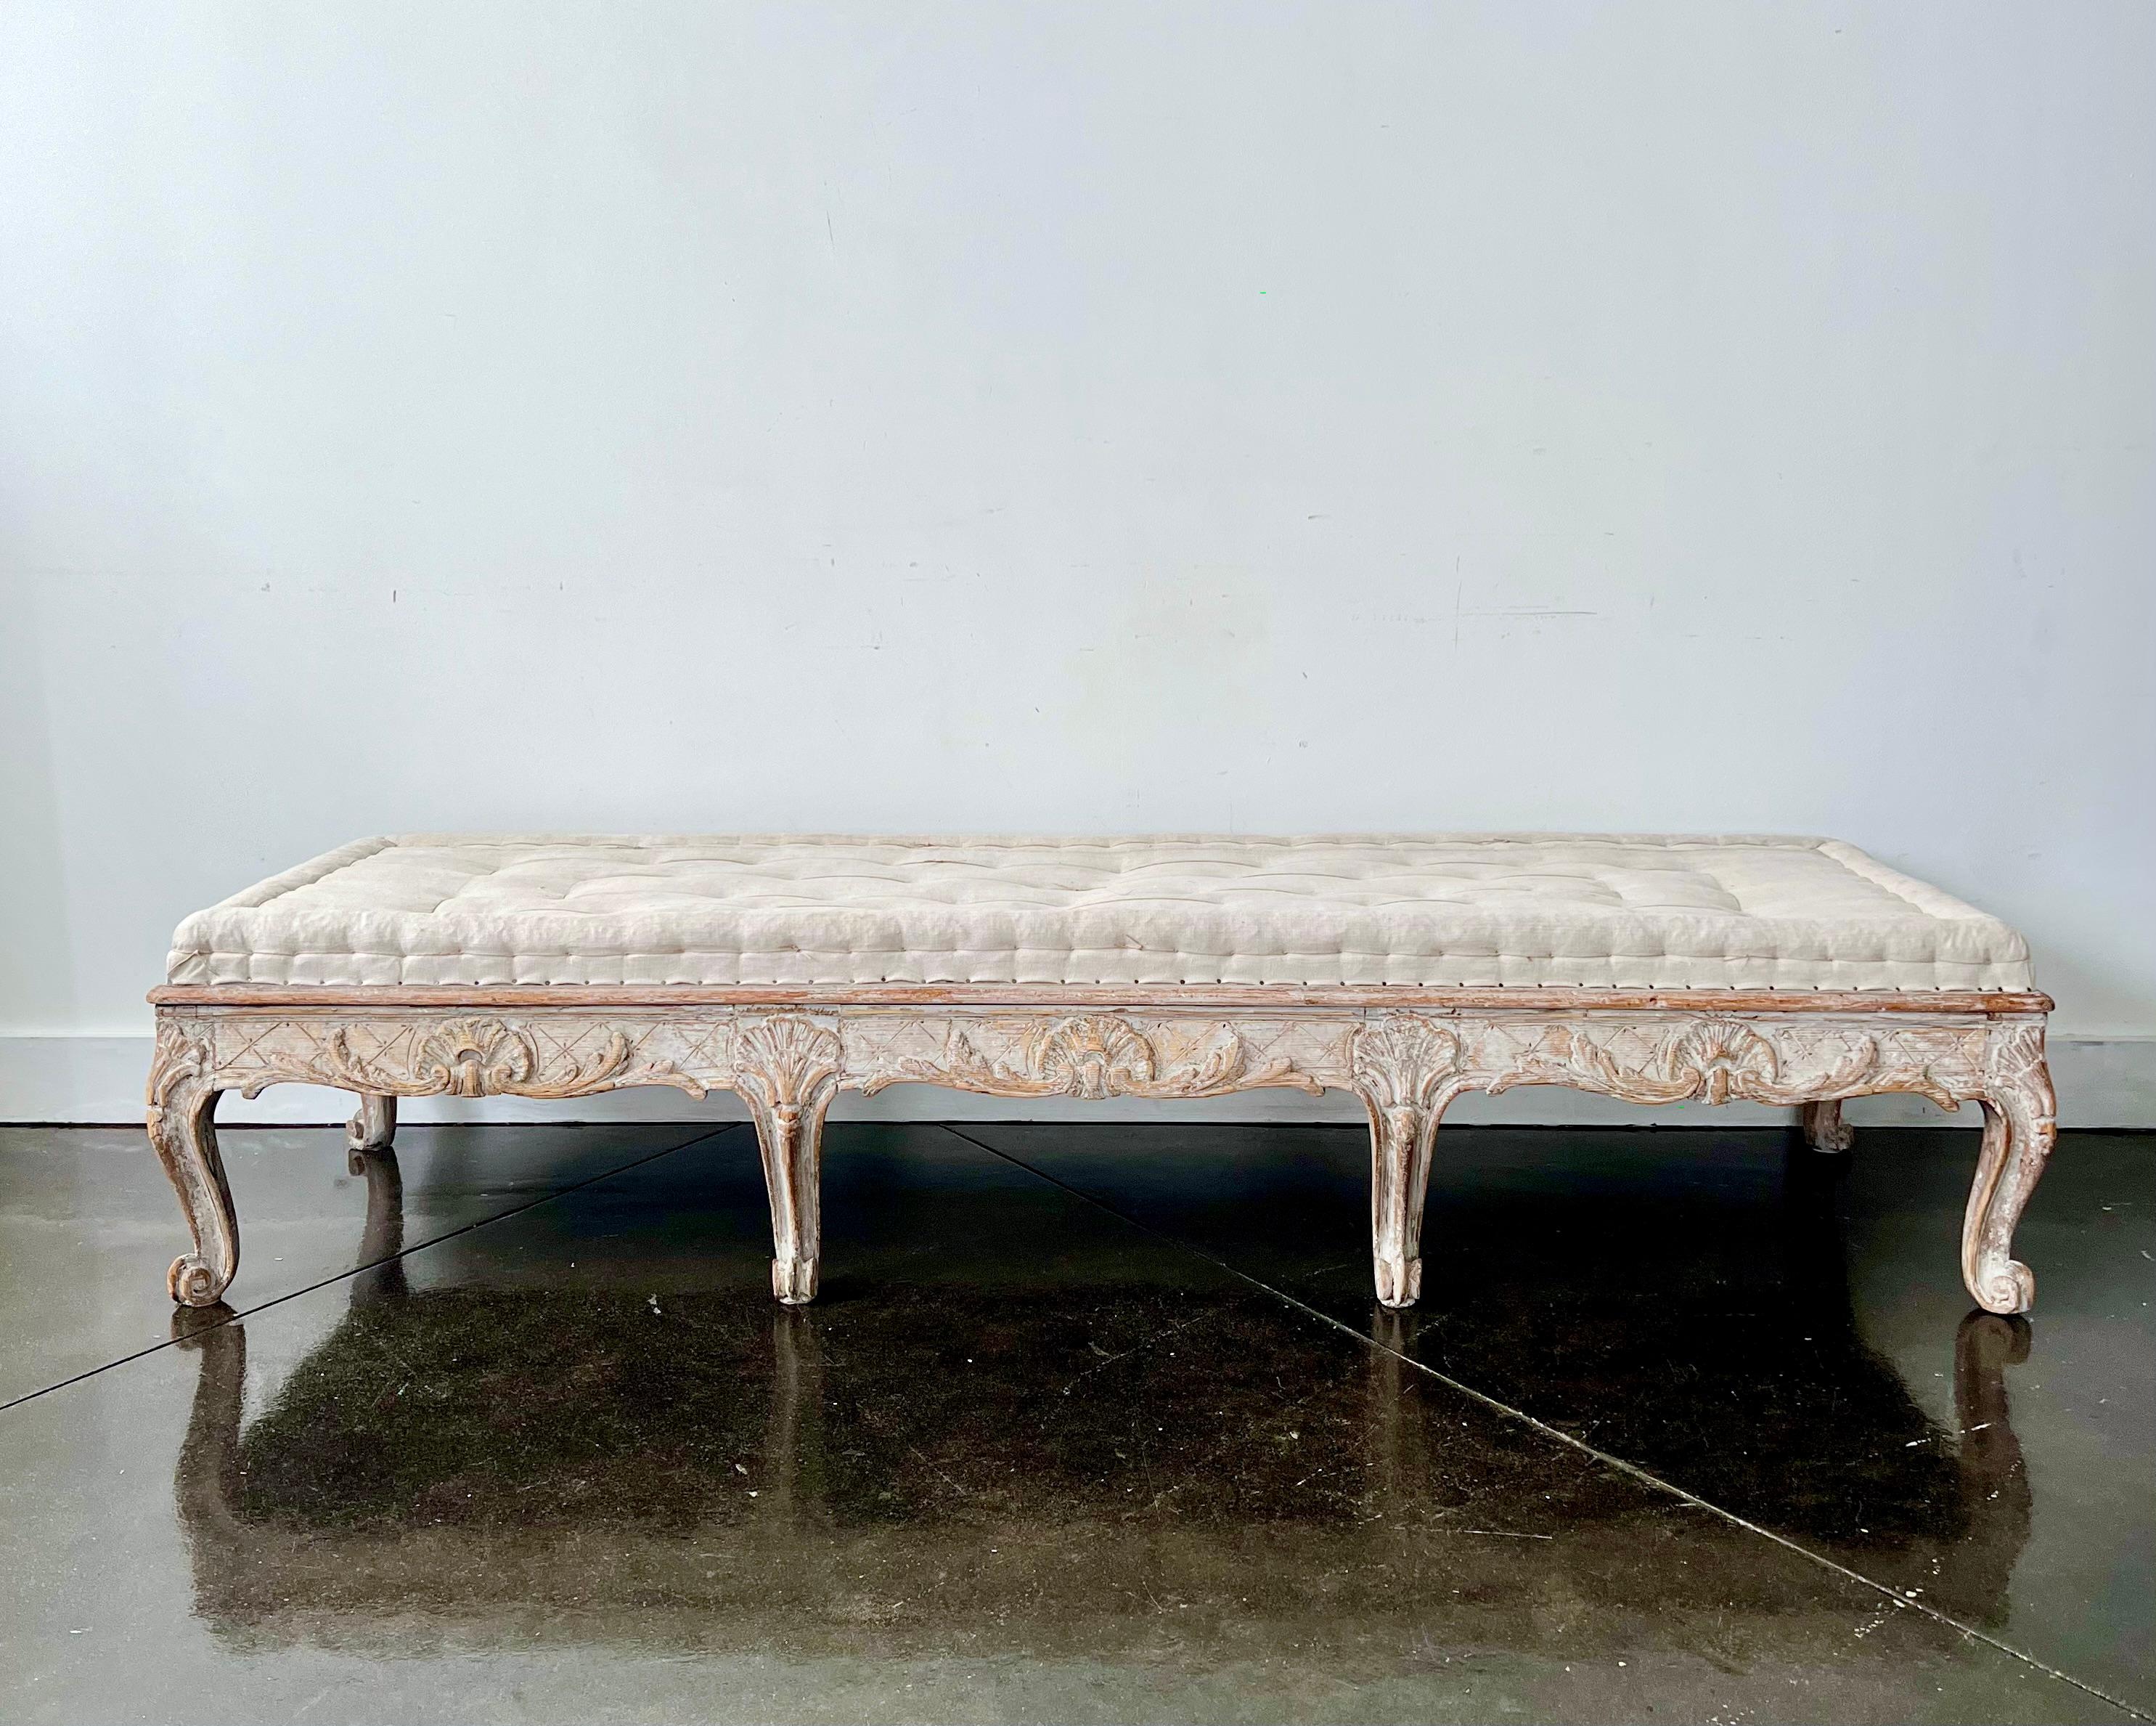 An exquisite, large and rare 18th century period Rococo sofa bench with hand-carved and richly decorated in scrolling carvings to three sides,
Scraped to original cream white finish and upholstered in traditional way in antique hand stitched linen.